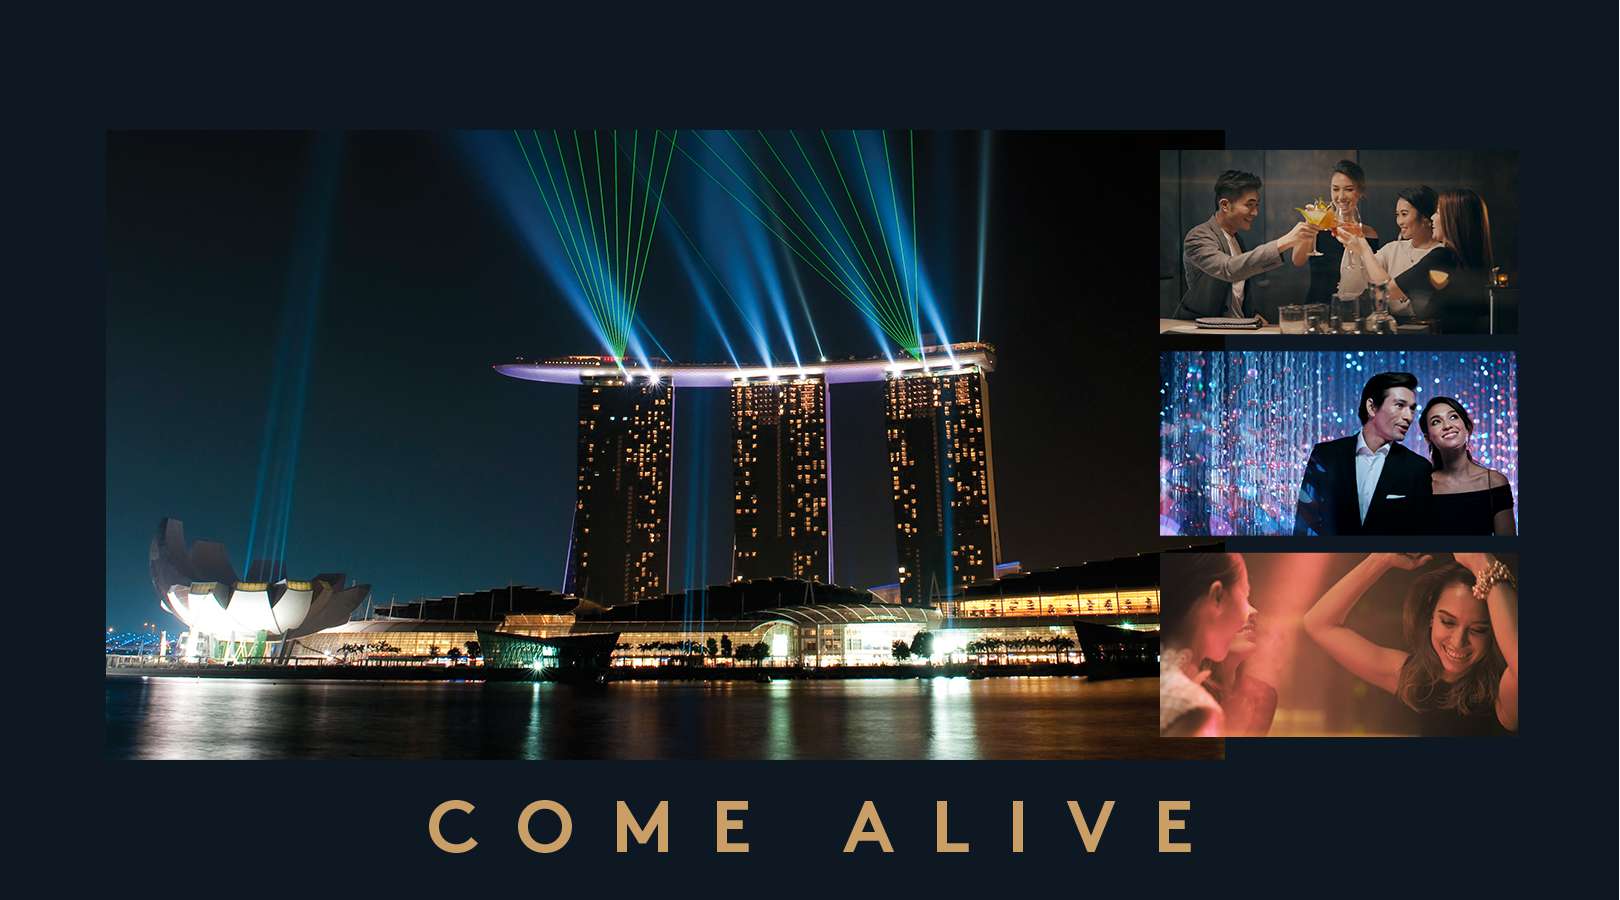 Marina Bay Sands, Luxury 5 Star Hotel and Integrated Resort in Singapore